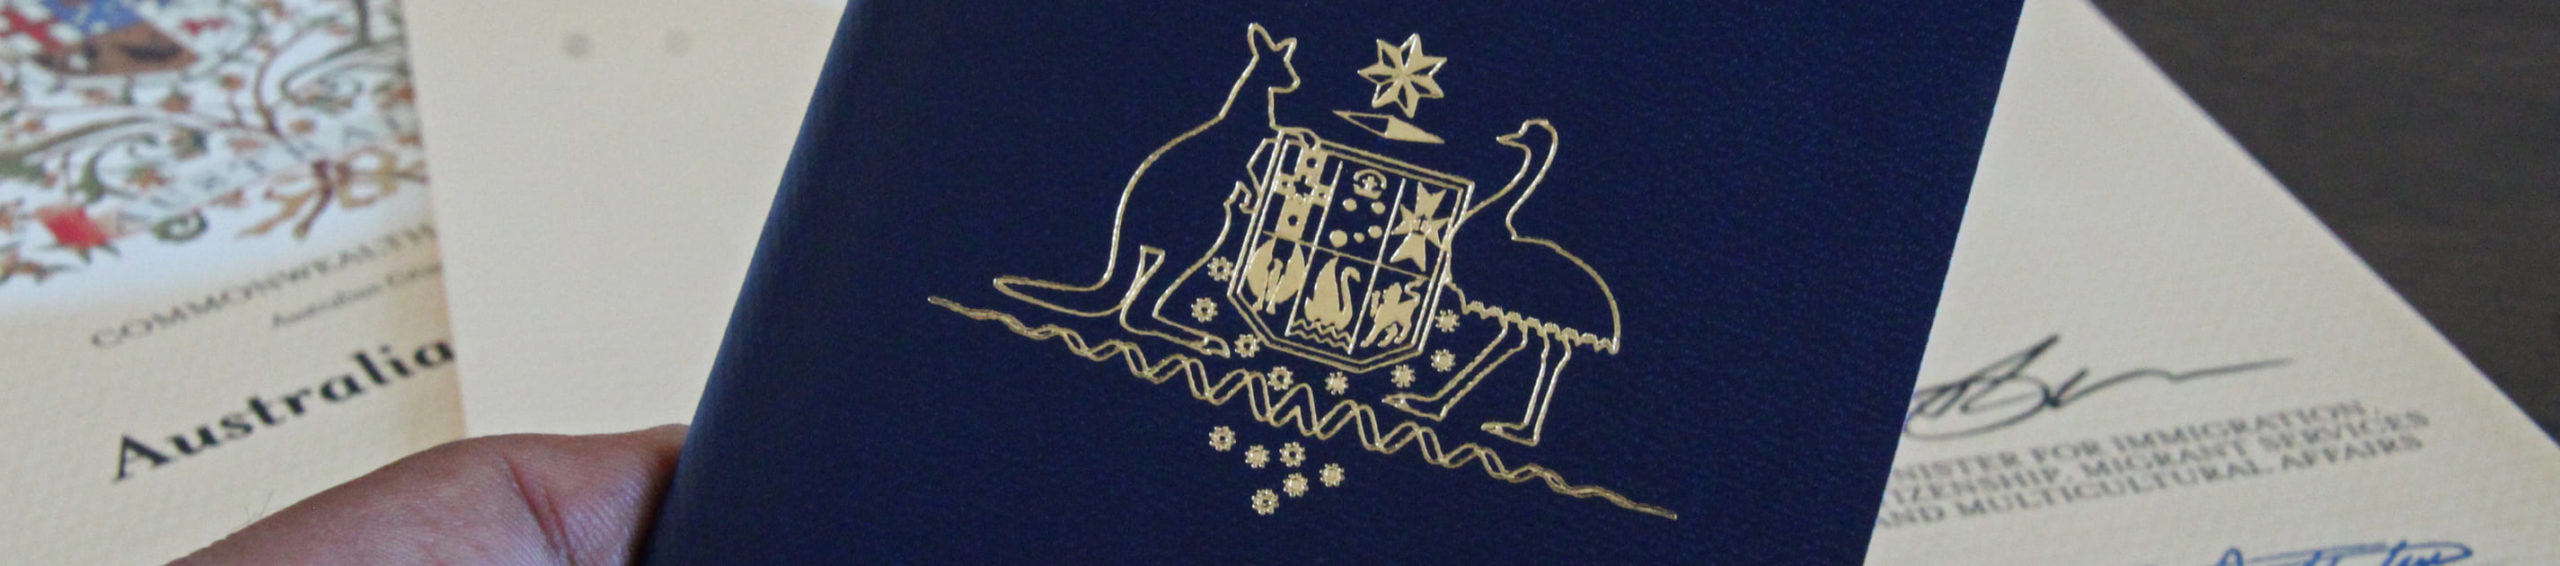 Australian Citizenship - Comasters Law Firm and Notary Public